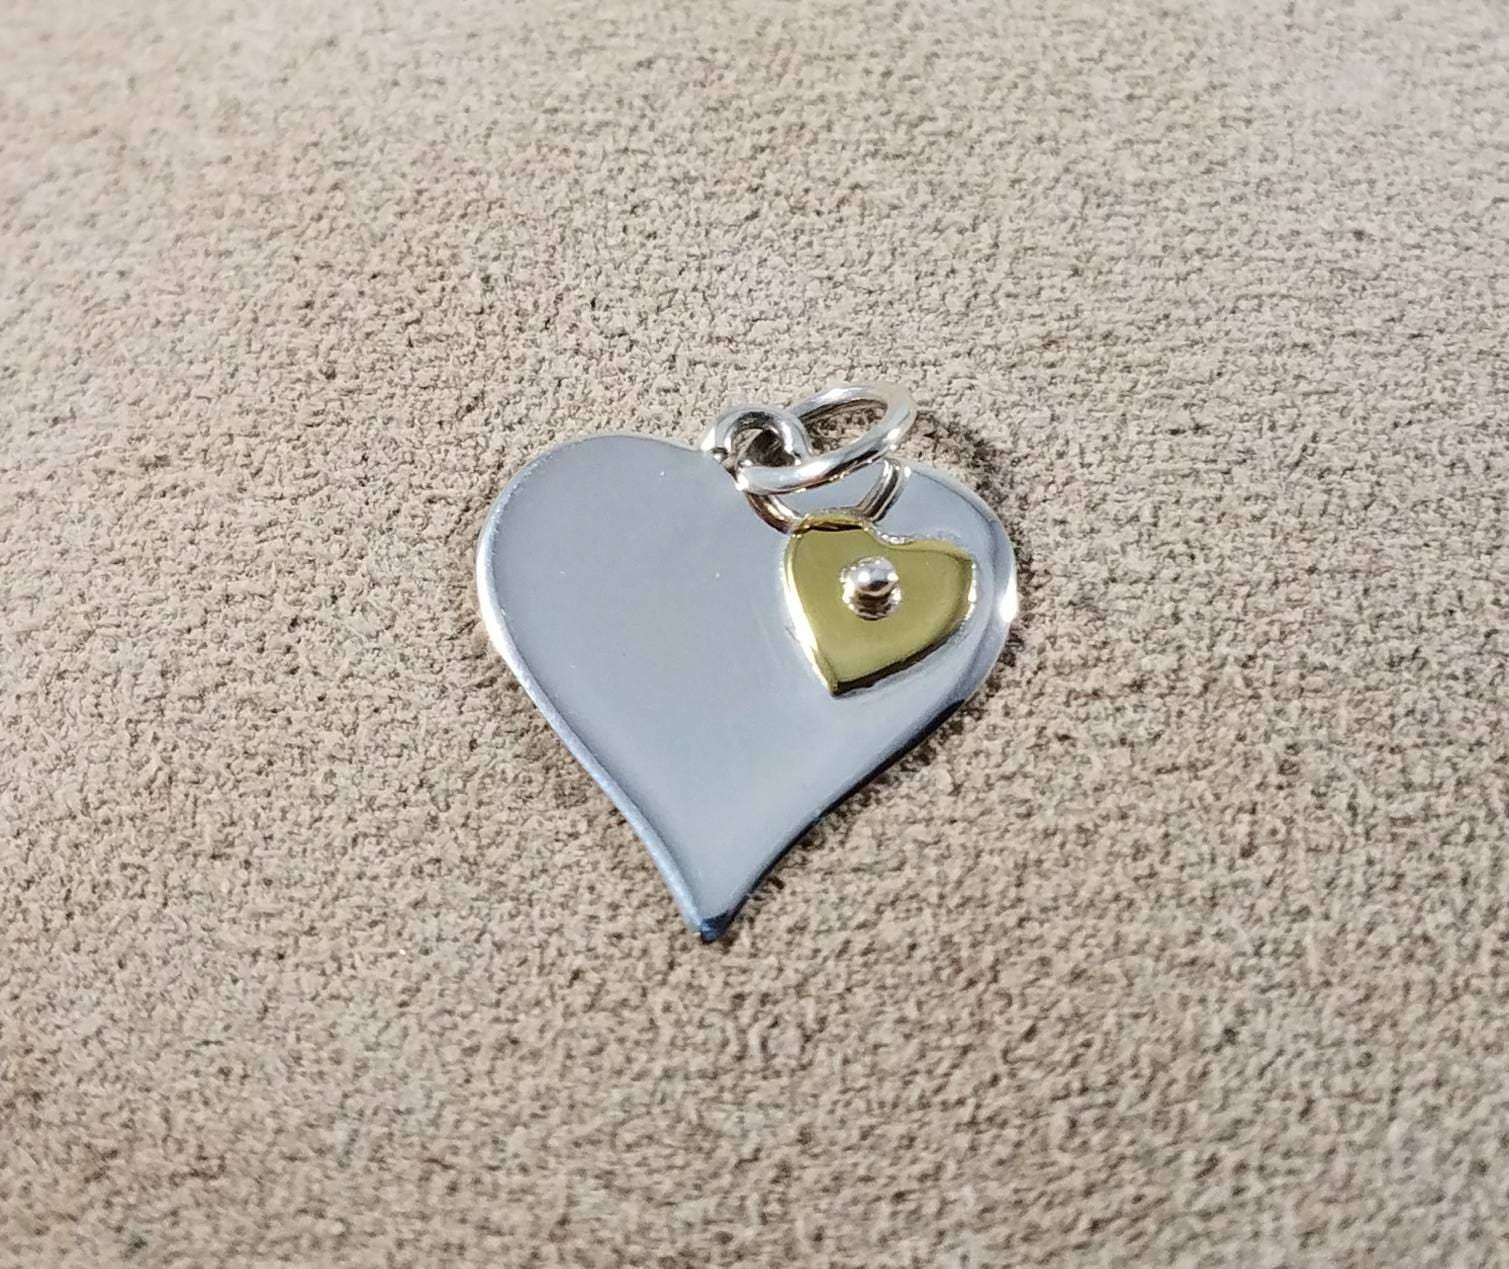 Sterling Silver Heart With Riveted Bronze Heart Charm Heart - Etsy